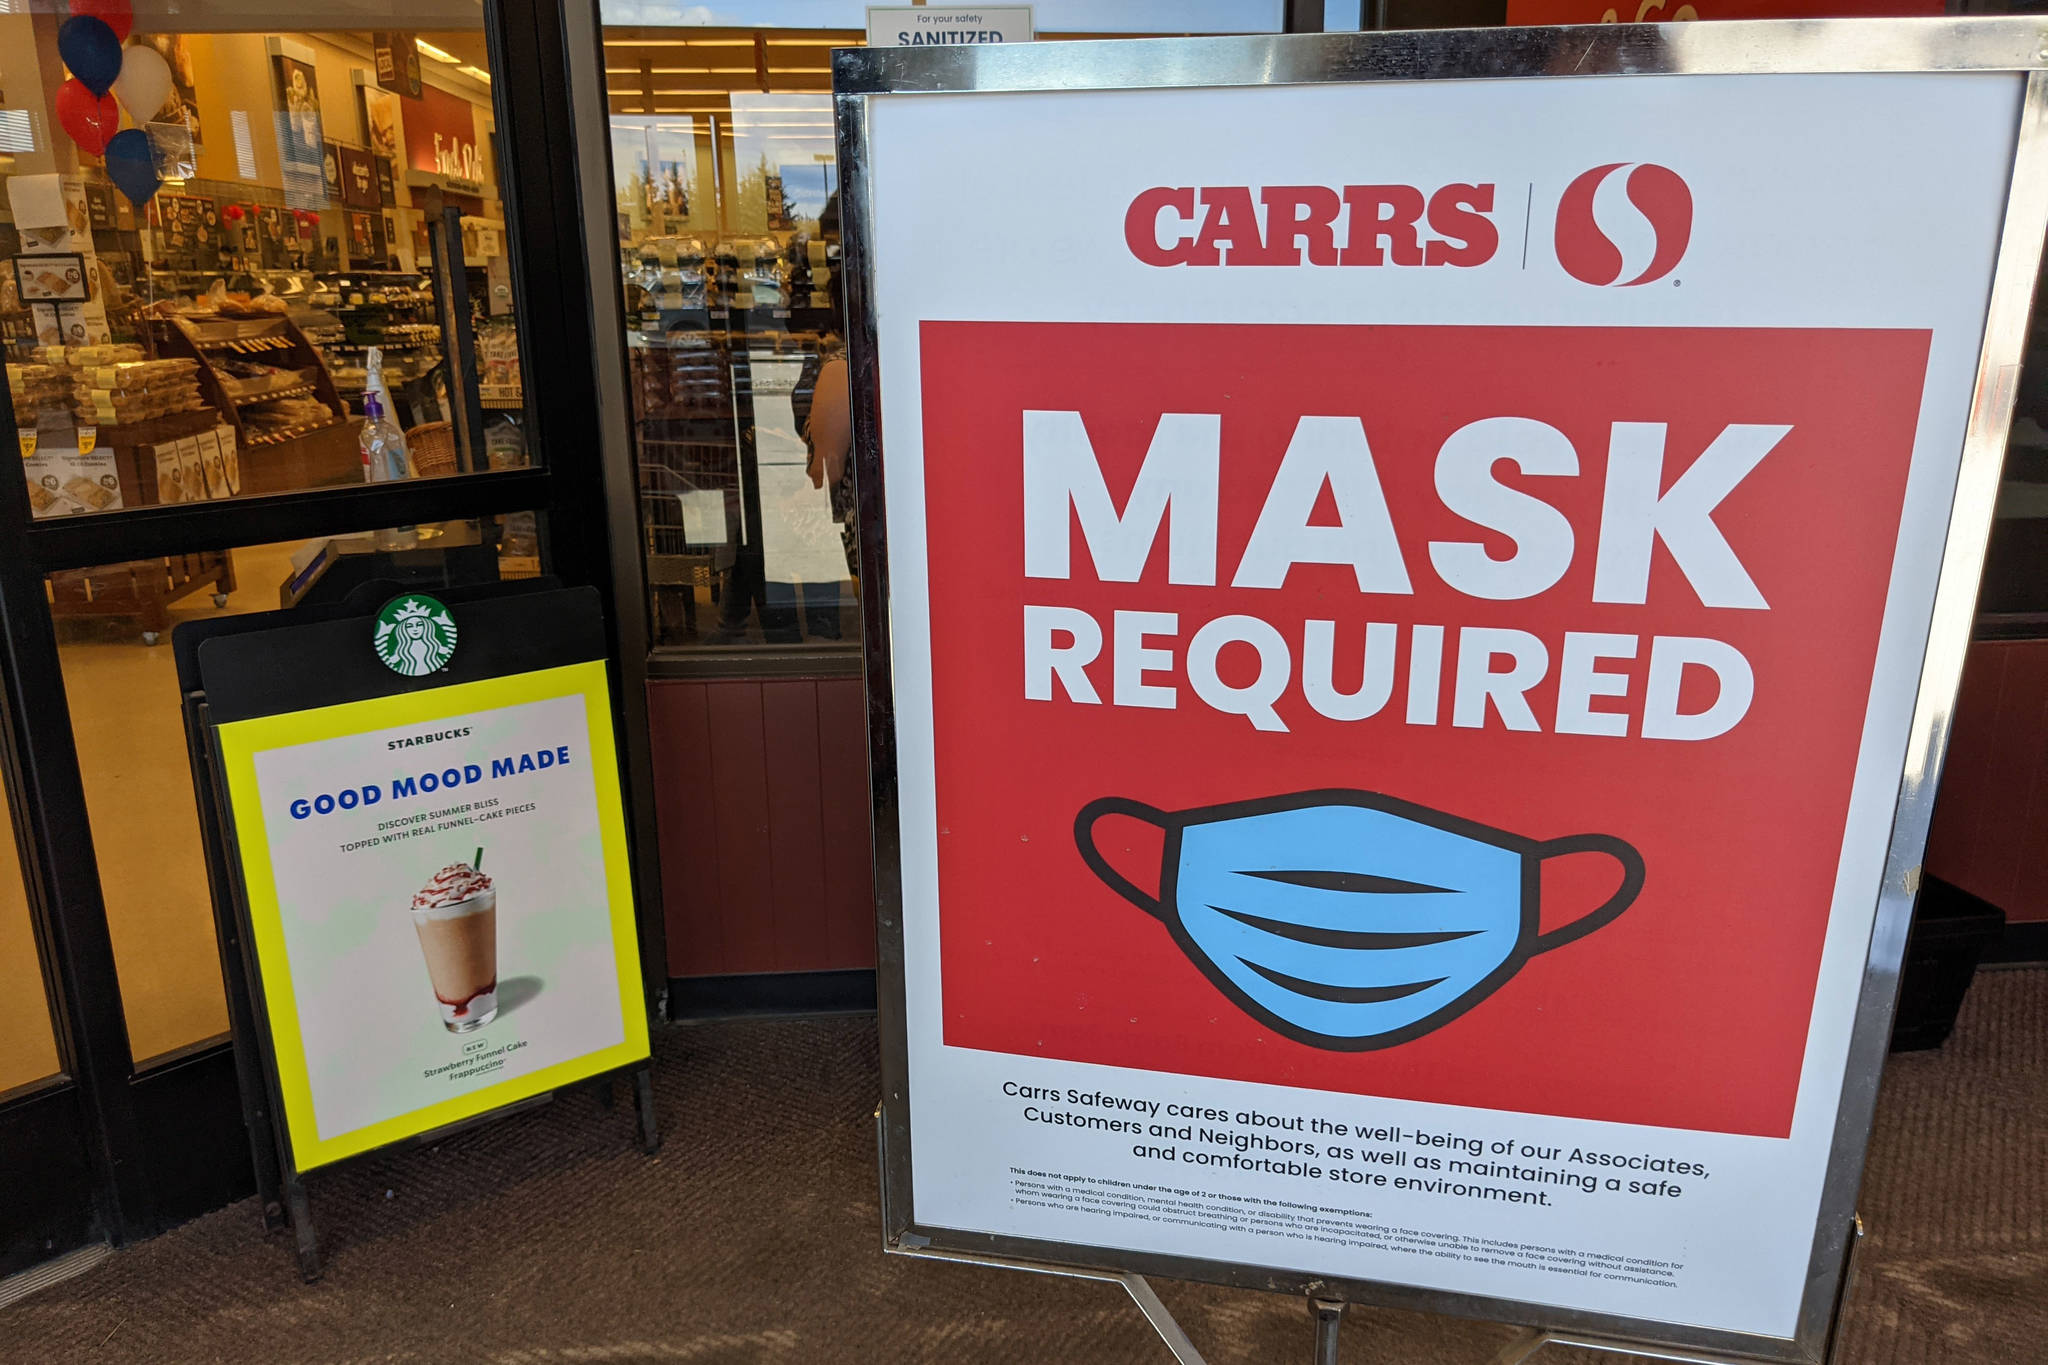 A sign explaining mask policy can be seen at Safeway grocery store in Kenai, Alaska, on Thursday, May 13, 2021. (Photo by Erin Thompson/Peninsula Clarion)